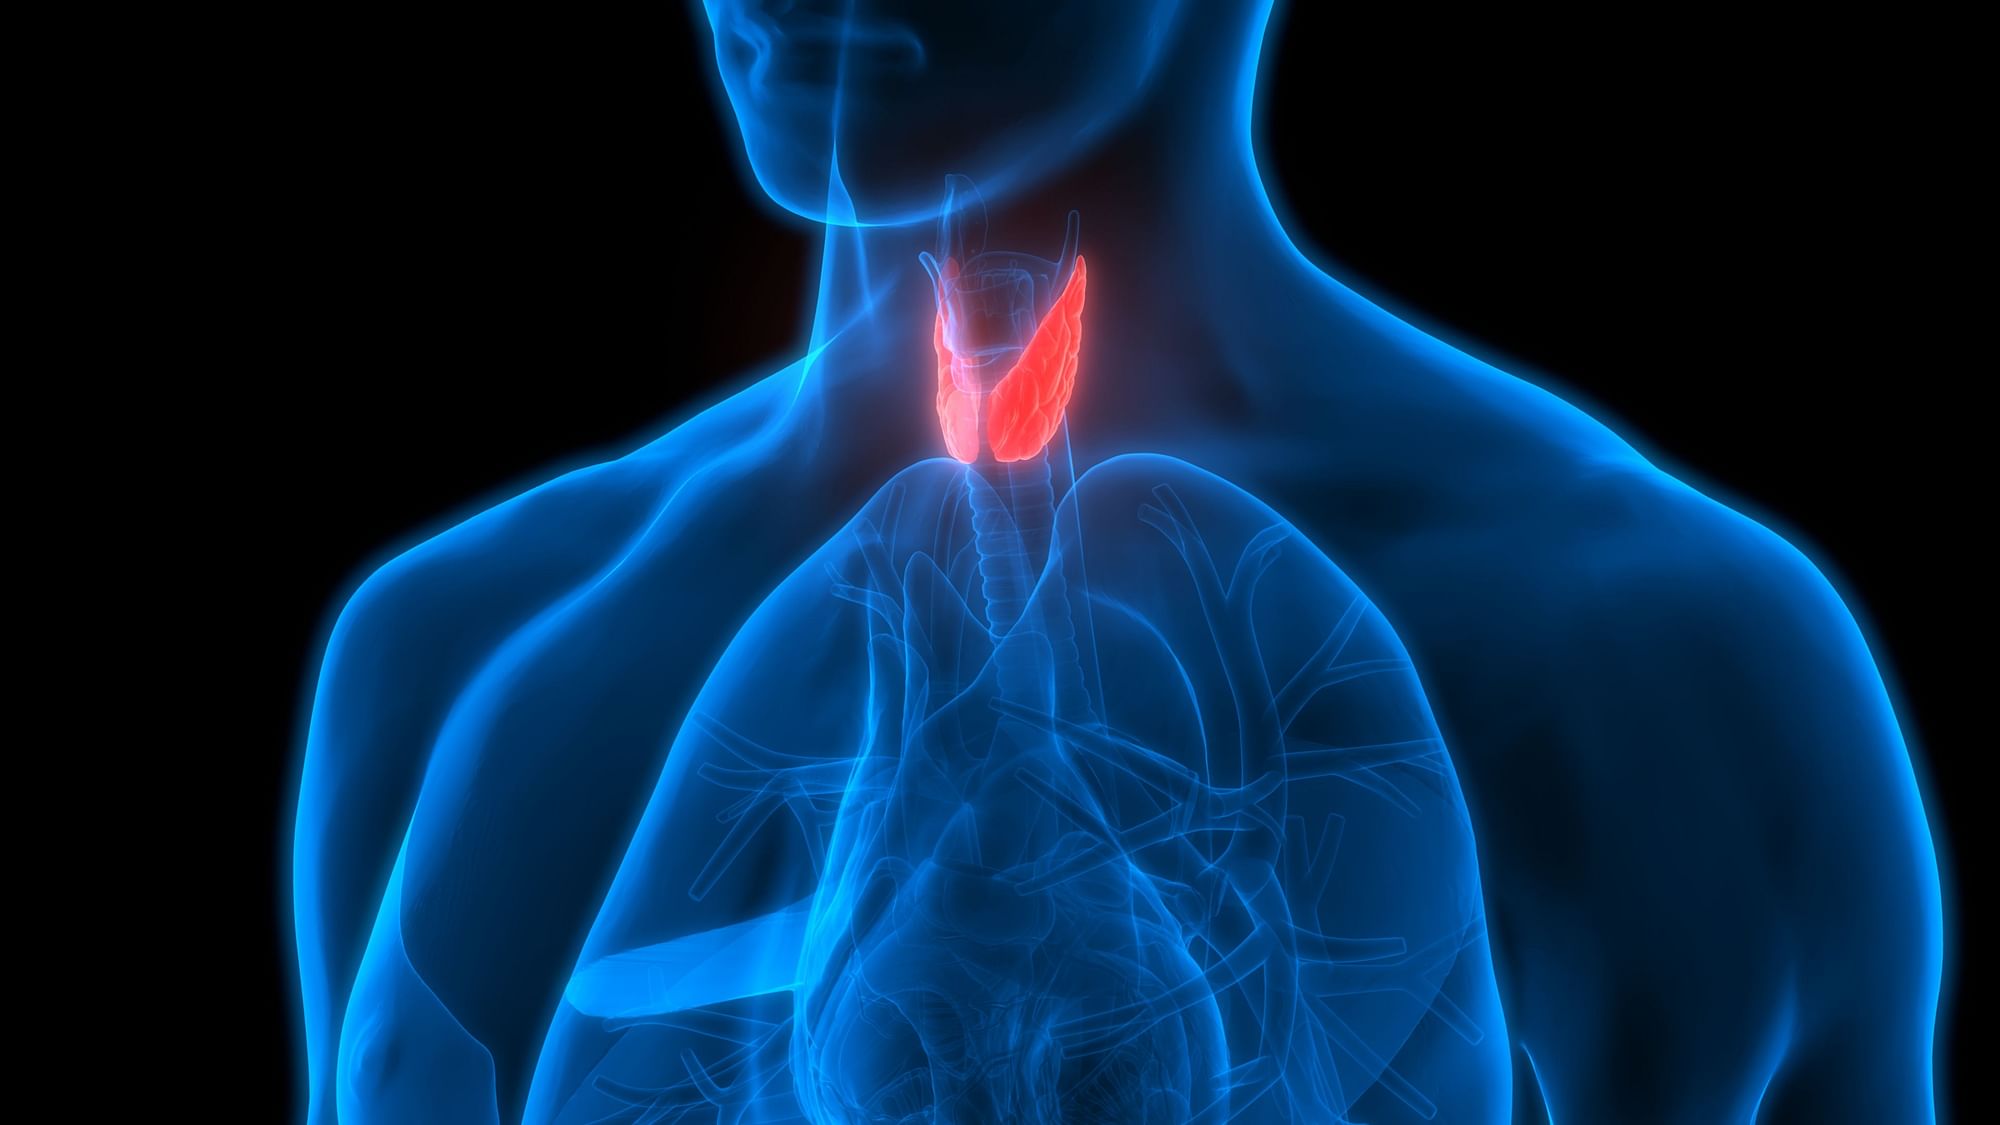 Cancers that occur in the back of the mouth and upper throat are often not diagnosed until they become advanced.